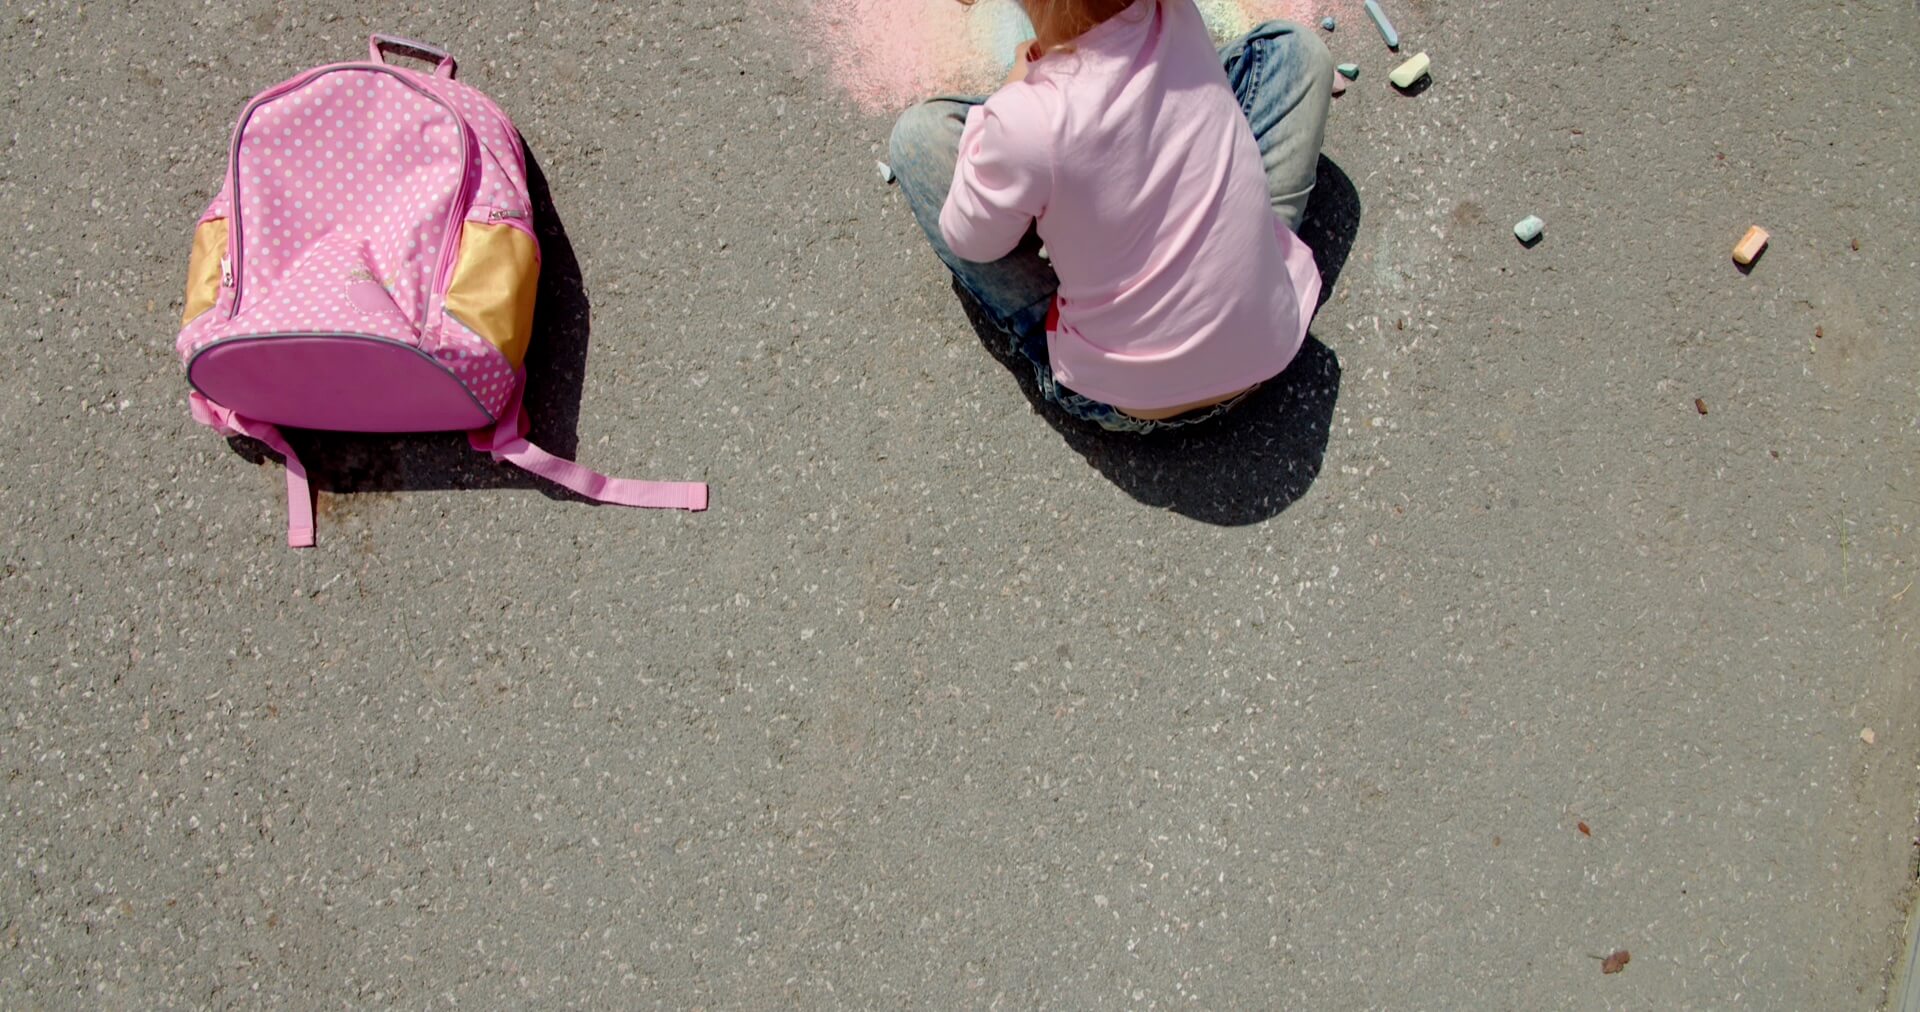 Child sitting on pavement in new home communities in Mansfield TX with a pink backpack and sidewalk chalk.